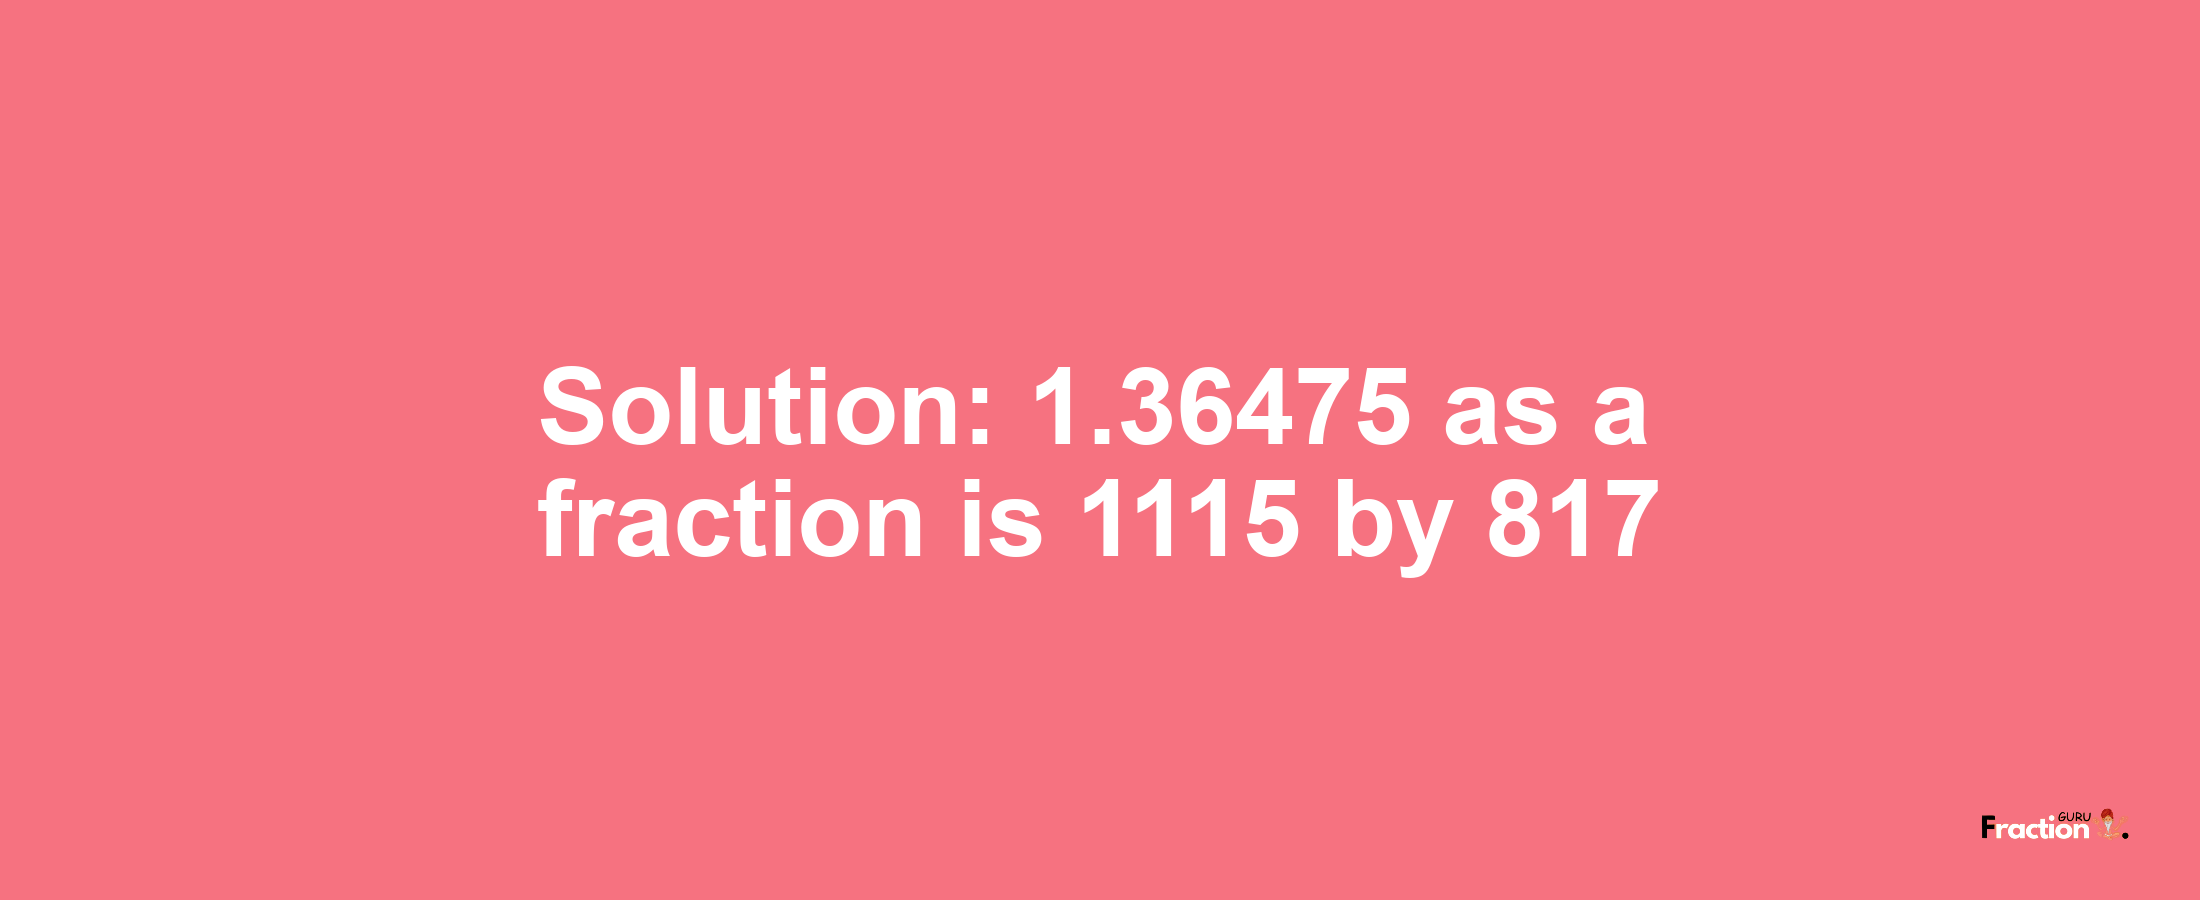 Solution:1.36475 as a fraction is 1115/817